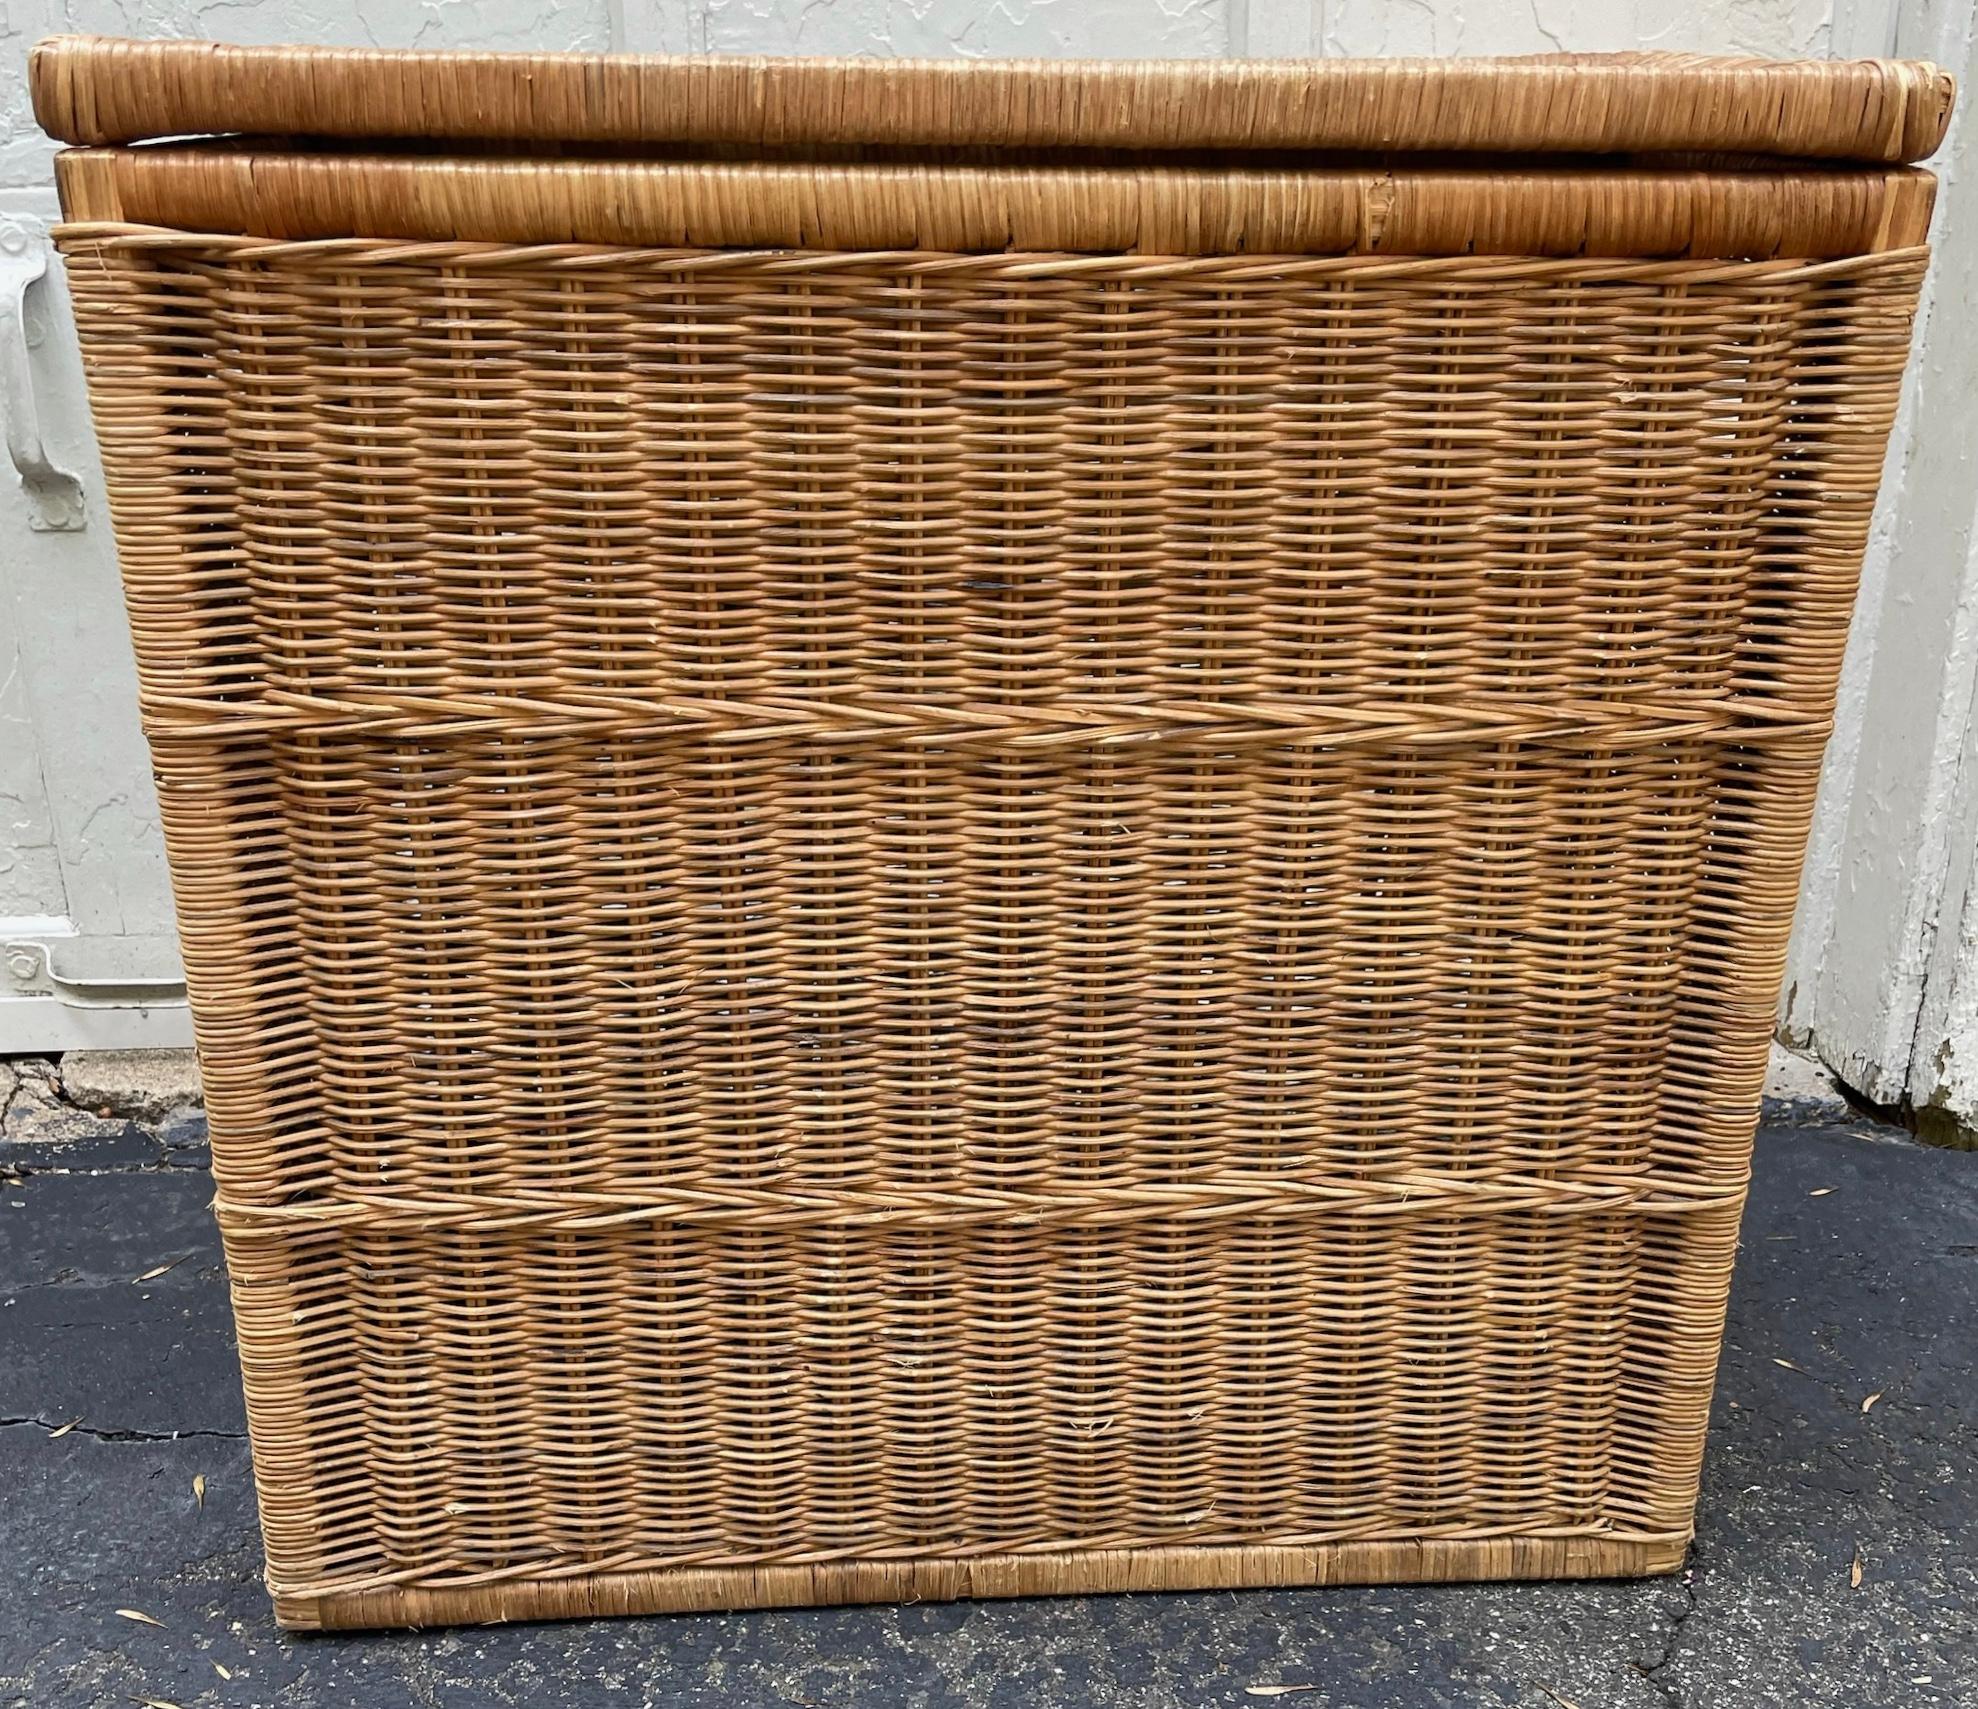 Natural wicker laundry hamper. Natural stain double compartment lidded wicker hamper with sides for light and dark laundry. United States, 20th century
Dimensions: 26